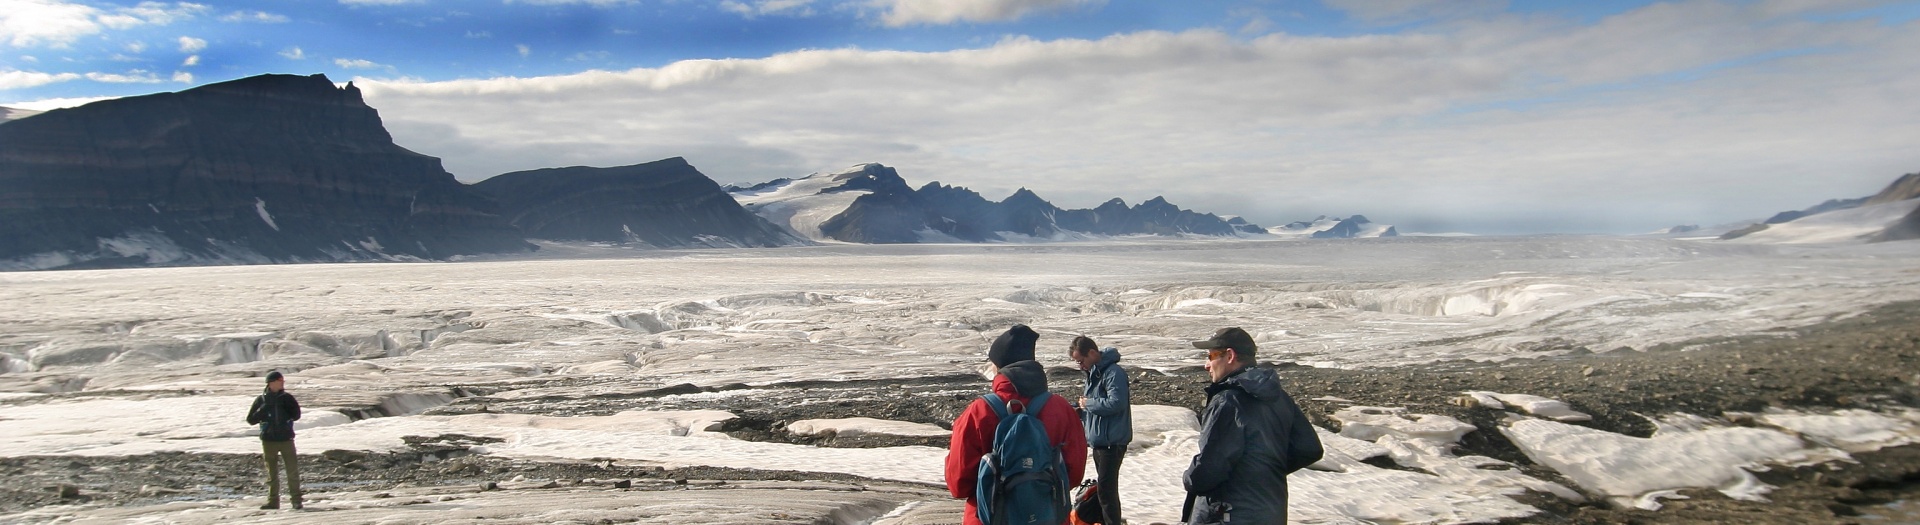 The Climate in Spitsbergen